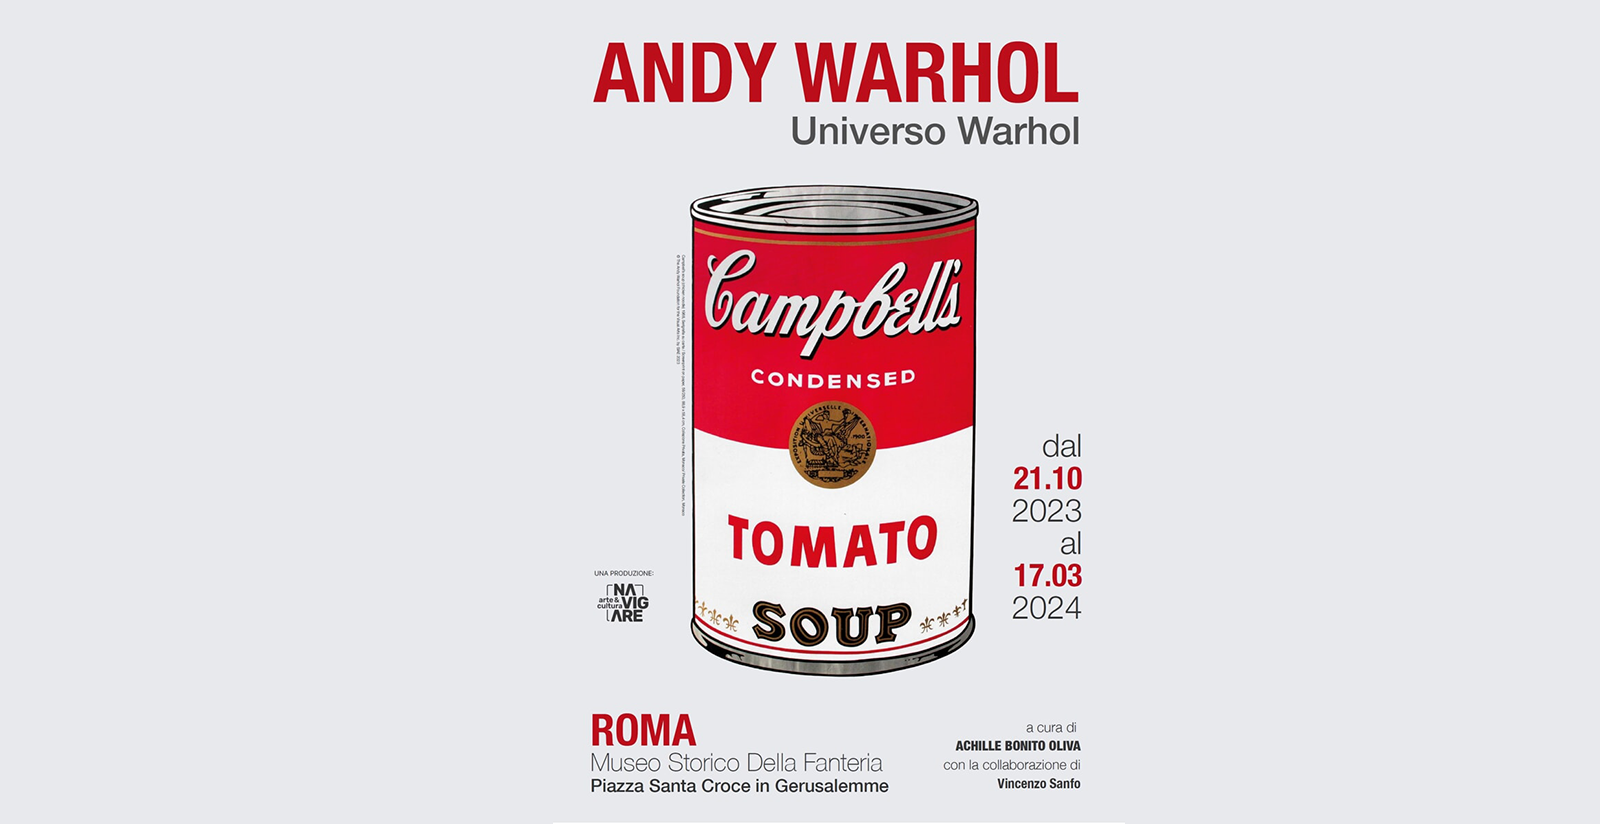 The Andy Warhol: Universo Warhol exhibition in Rome 1